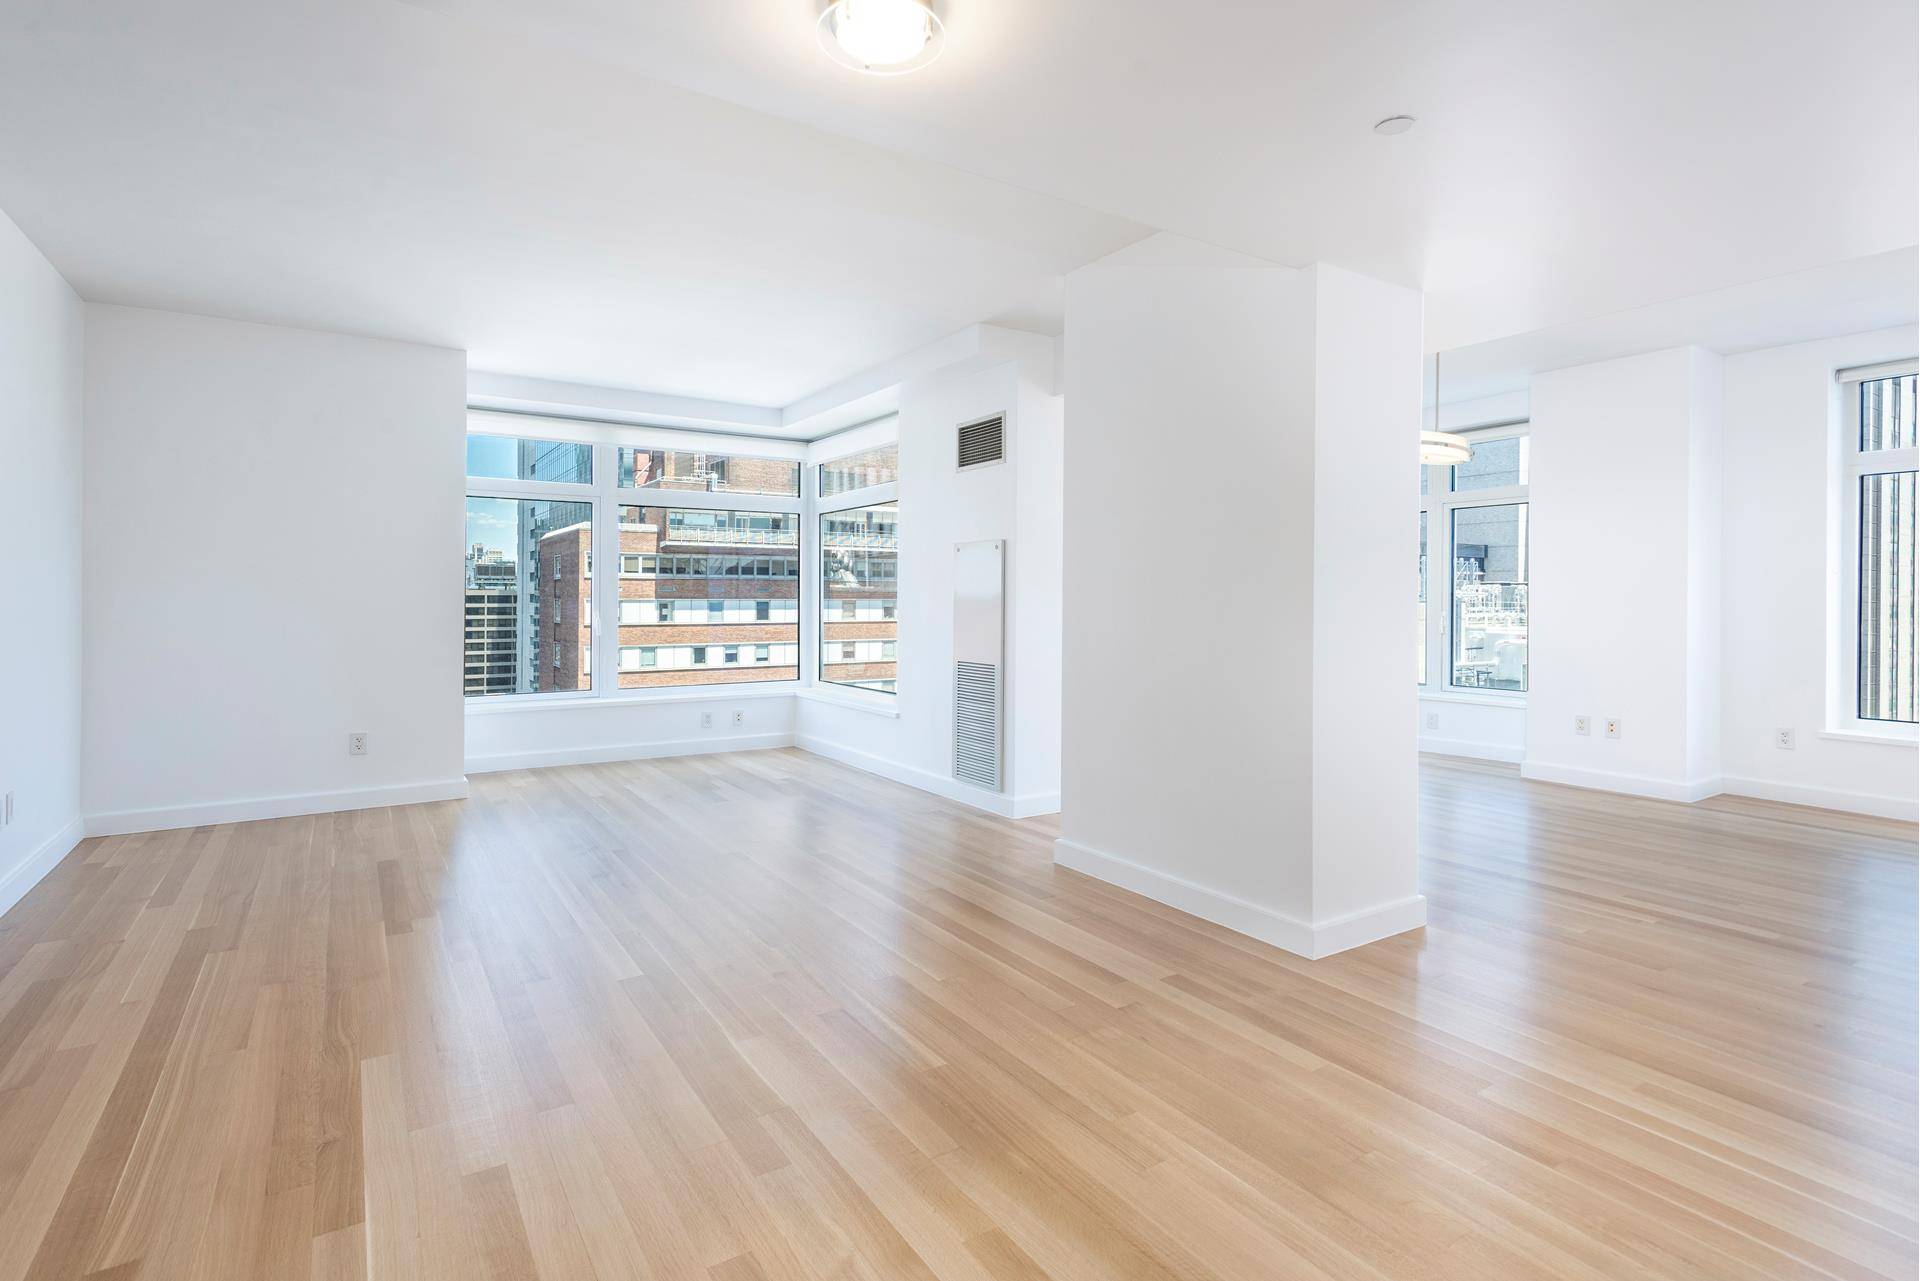 Stunning amp ; Superb, this beautiful North and East corner 3 bedroom, Convertible 4, Alternate Floor Plan Shown and 3 bathrooms offer city views, a gracious entry foyer and gallery, ...